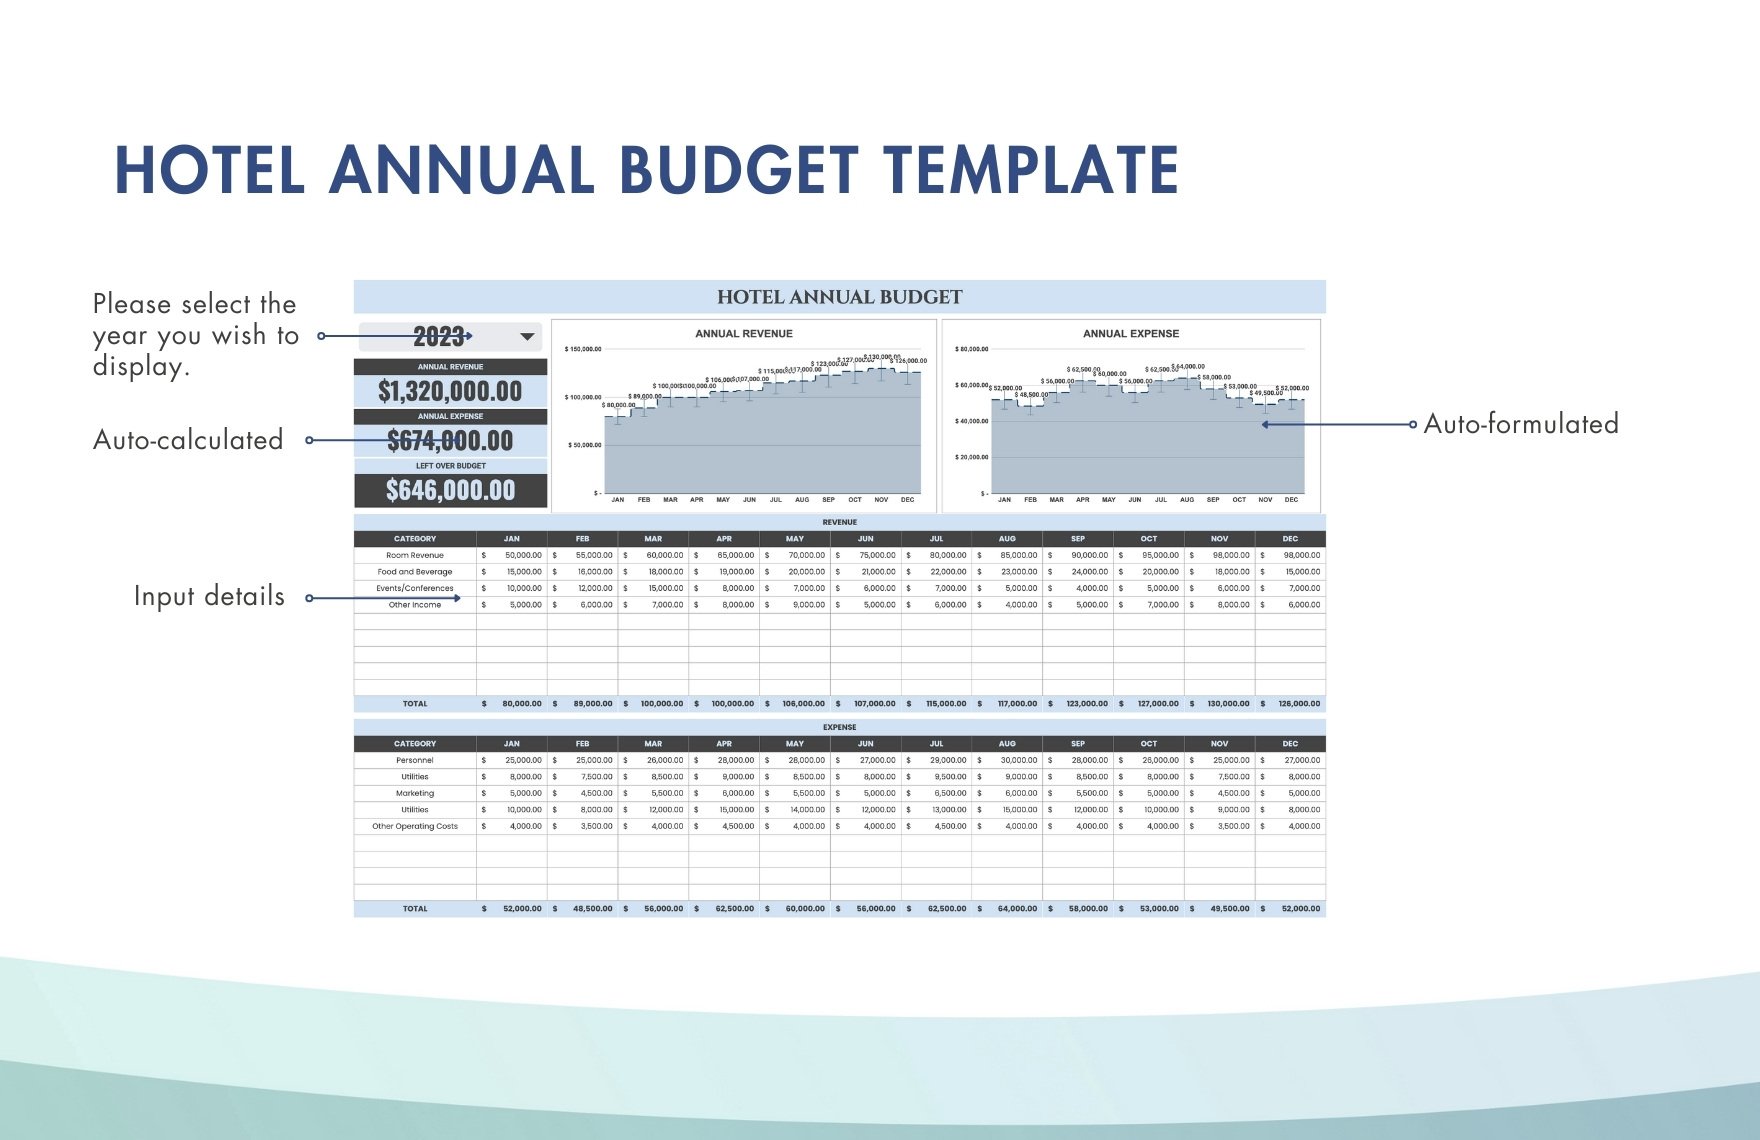 Hotel Annual Budget Template